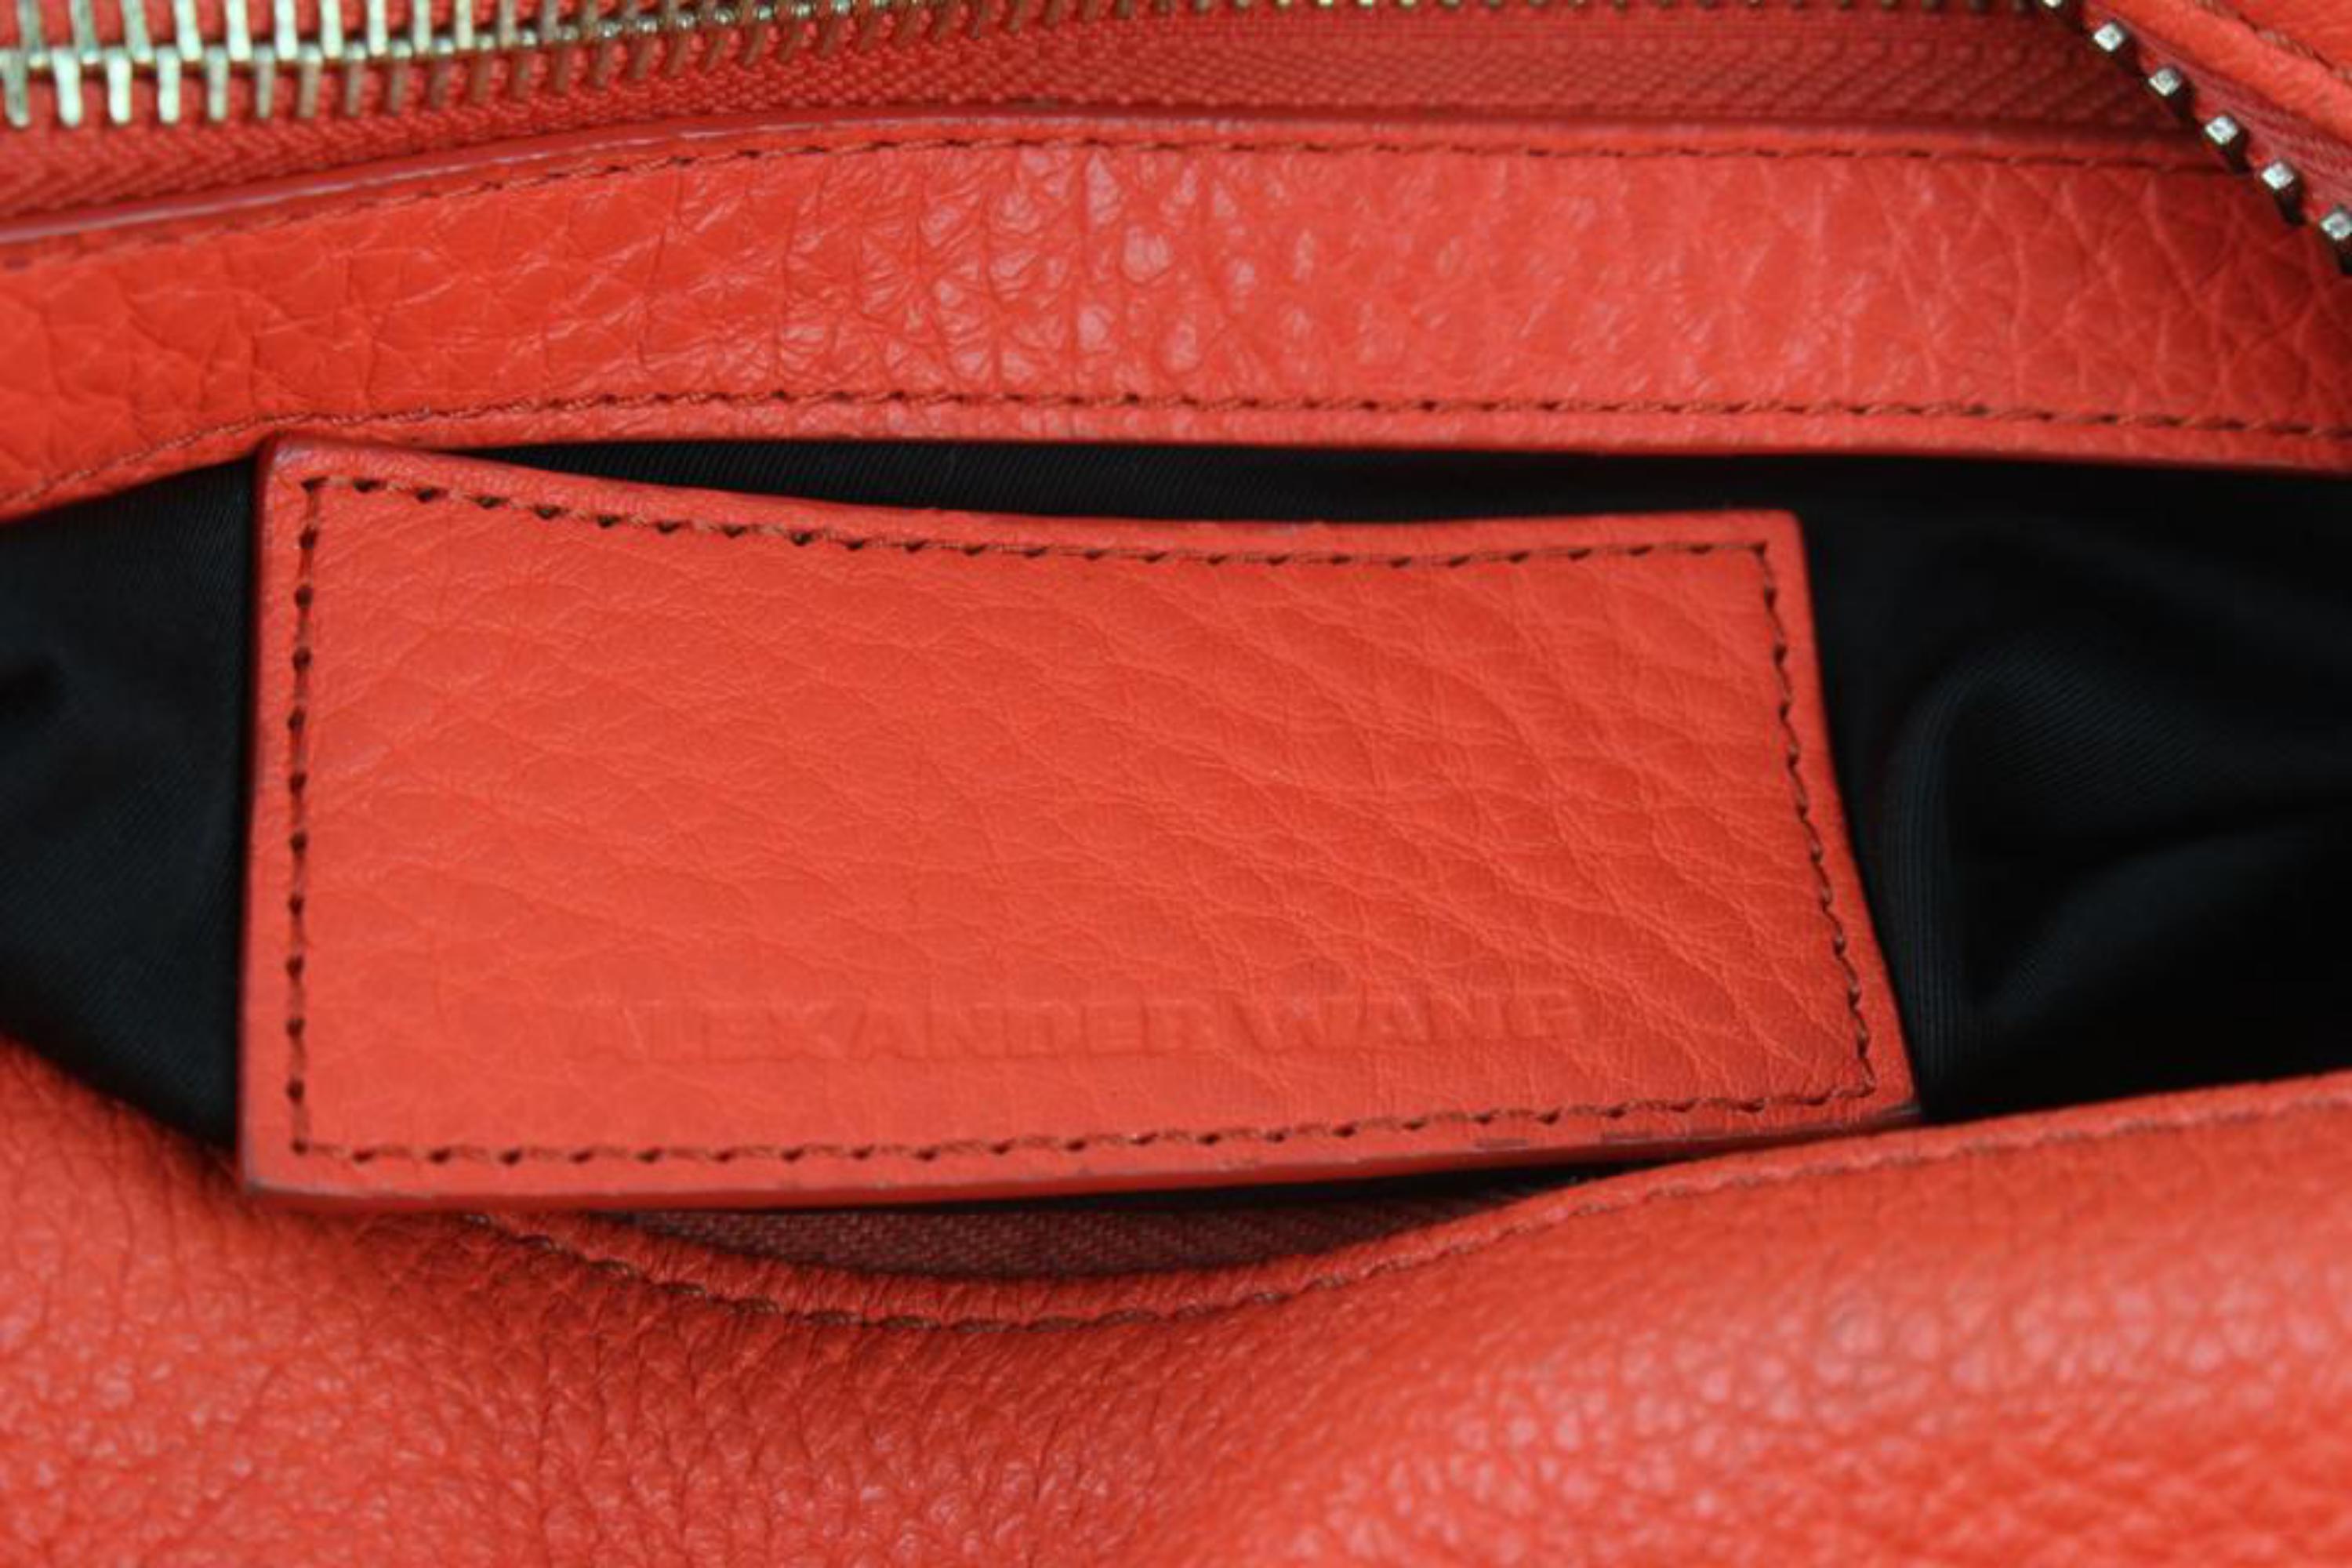 Alexander Wang Coral Pebbled Lamb Rocco 2way 9mz1025 Red Leather Shoulder Bag In Good Condition For Sale In Forest Hills, NY